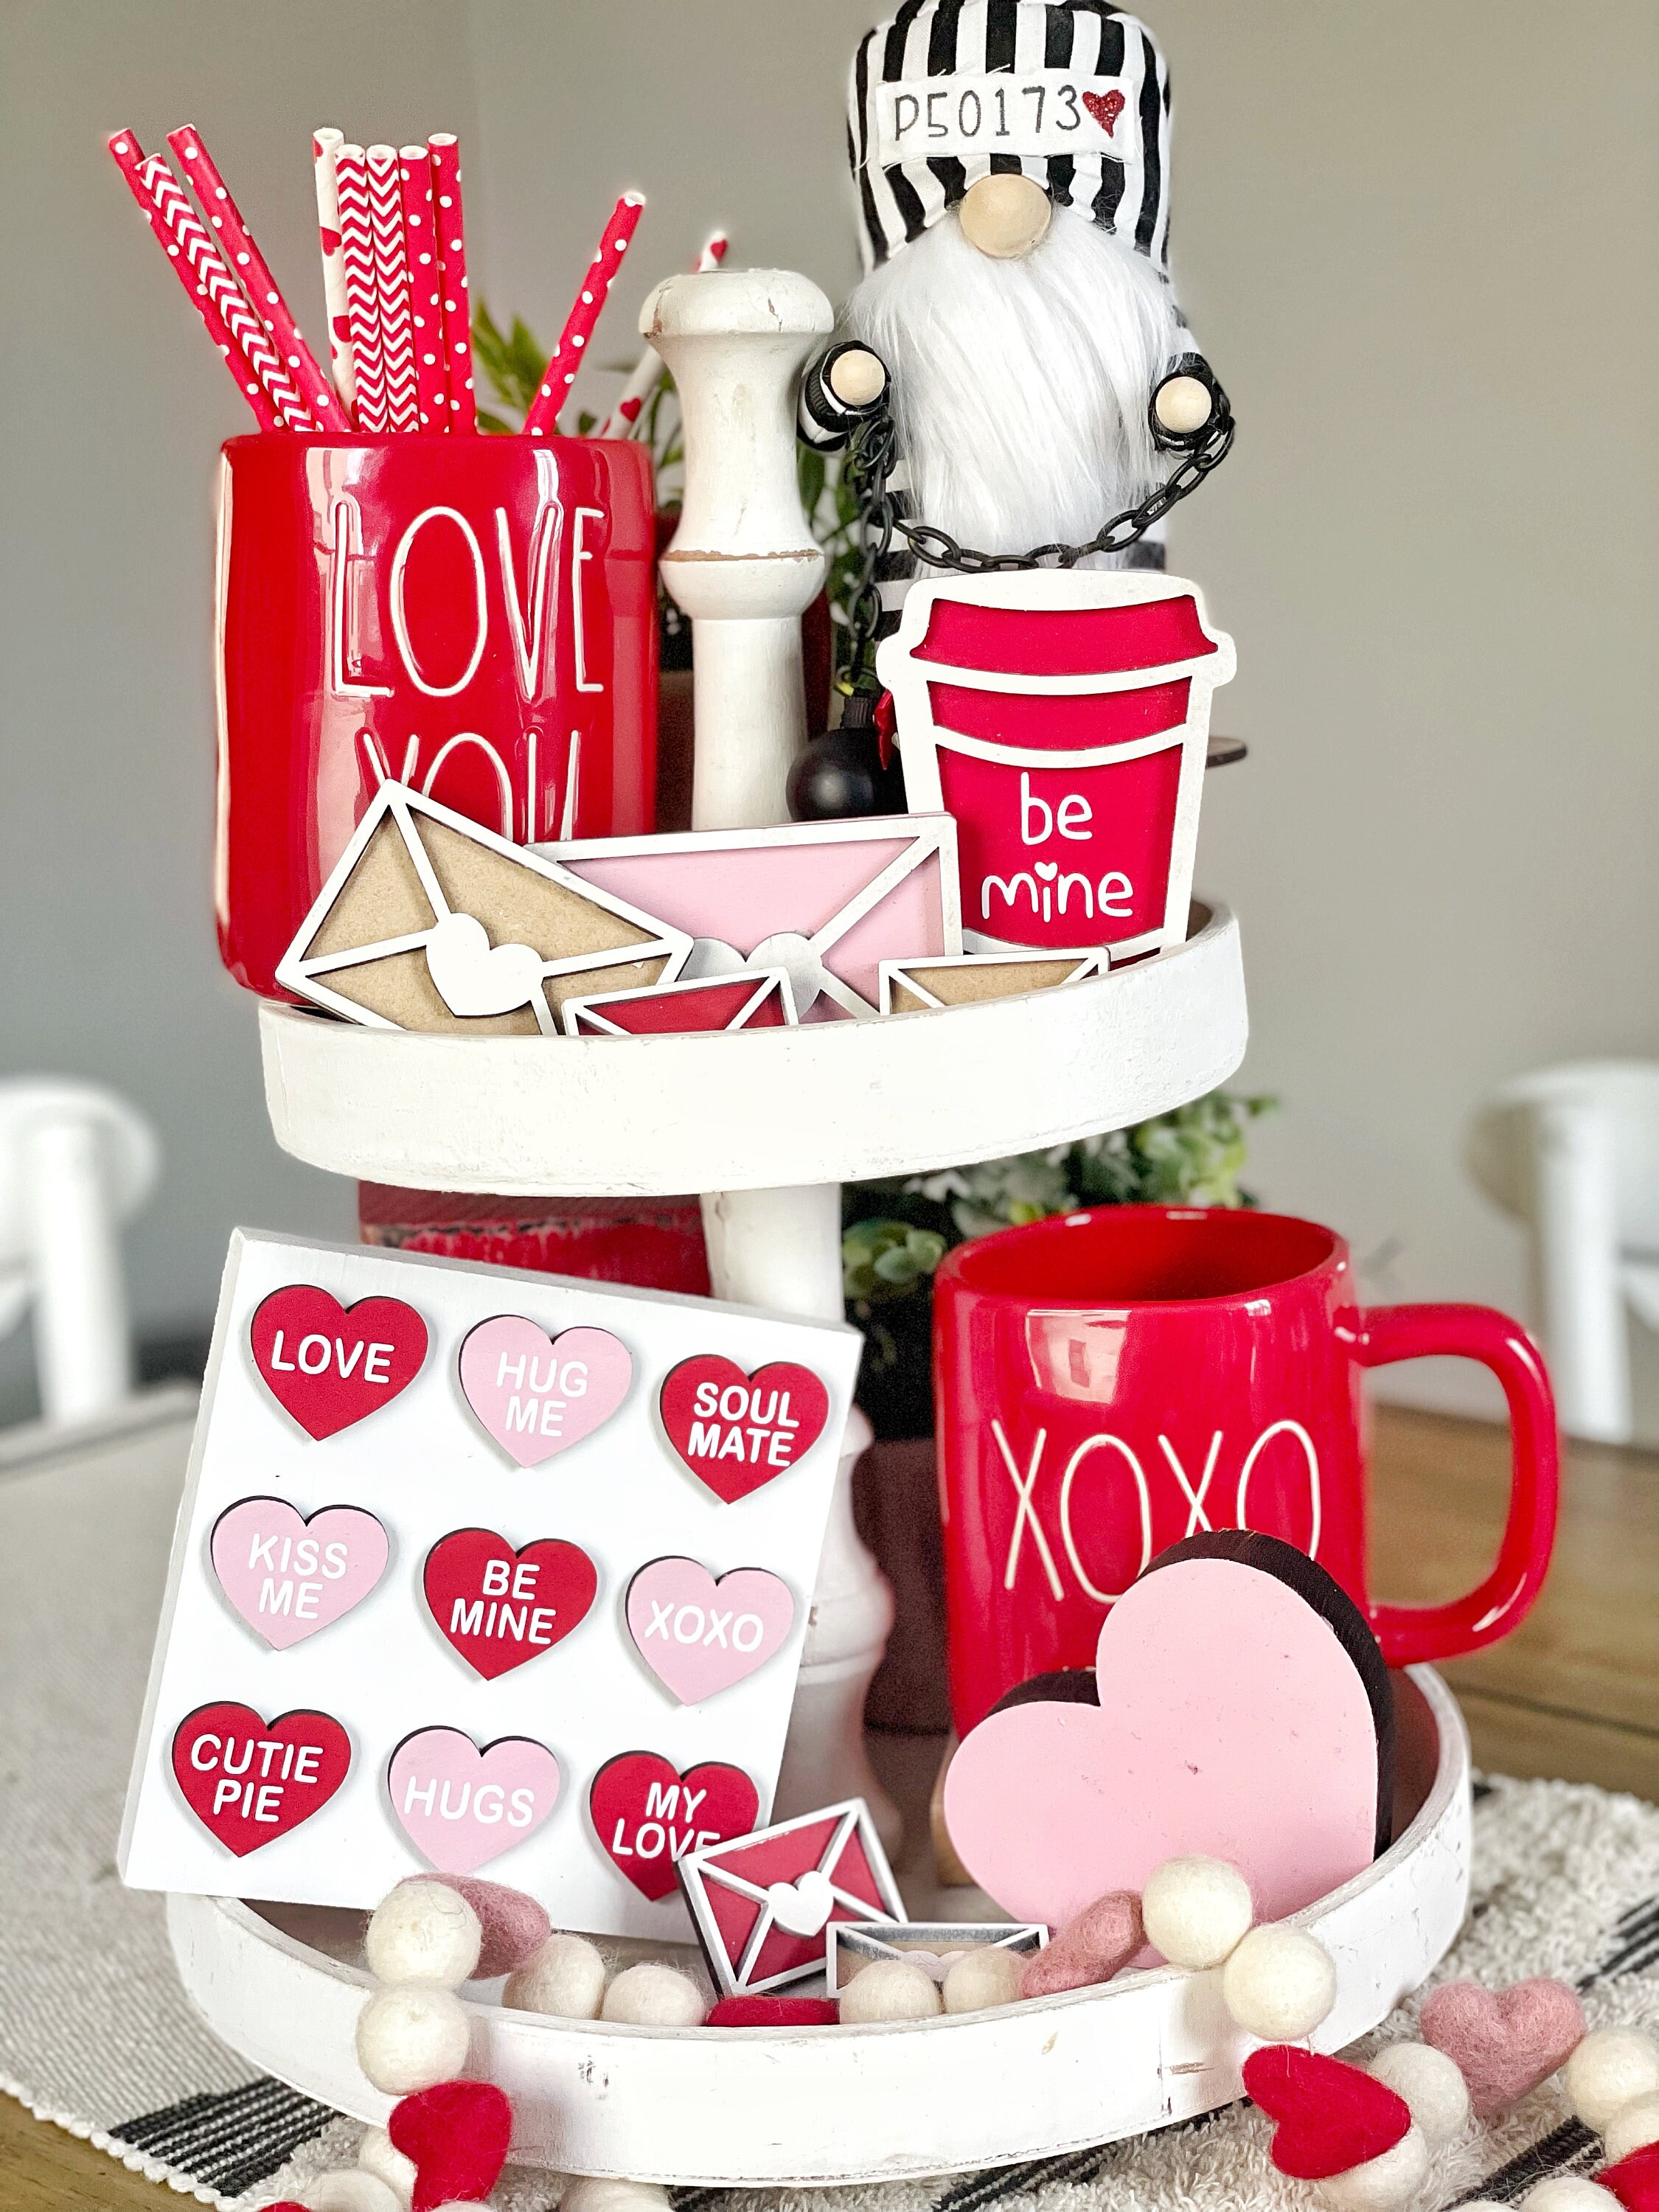 DAZONGE Valentines Day Decor, 6PCS Valentine Tiered Tray Decor, Be Mine  Book Stack, XOXO, Love Lives Here House Valentine Signs, Freestanding